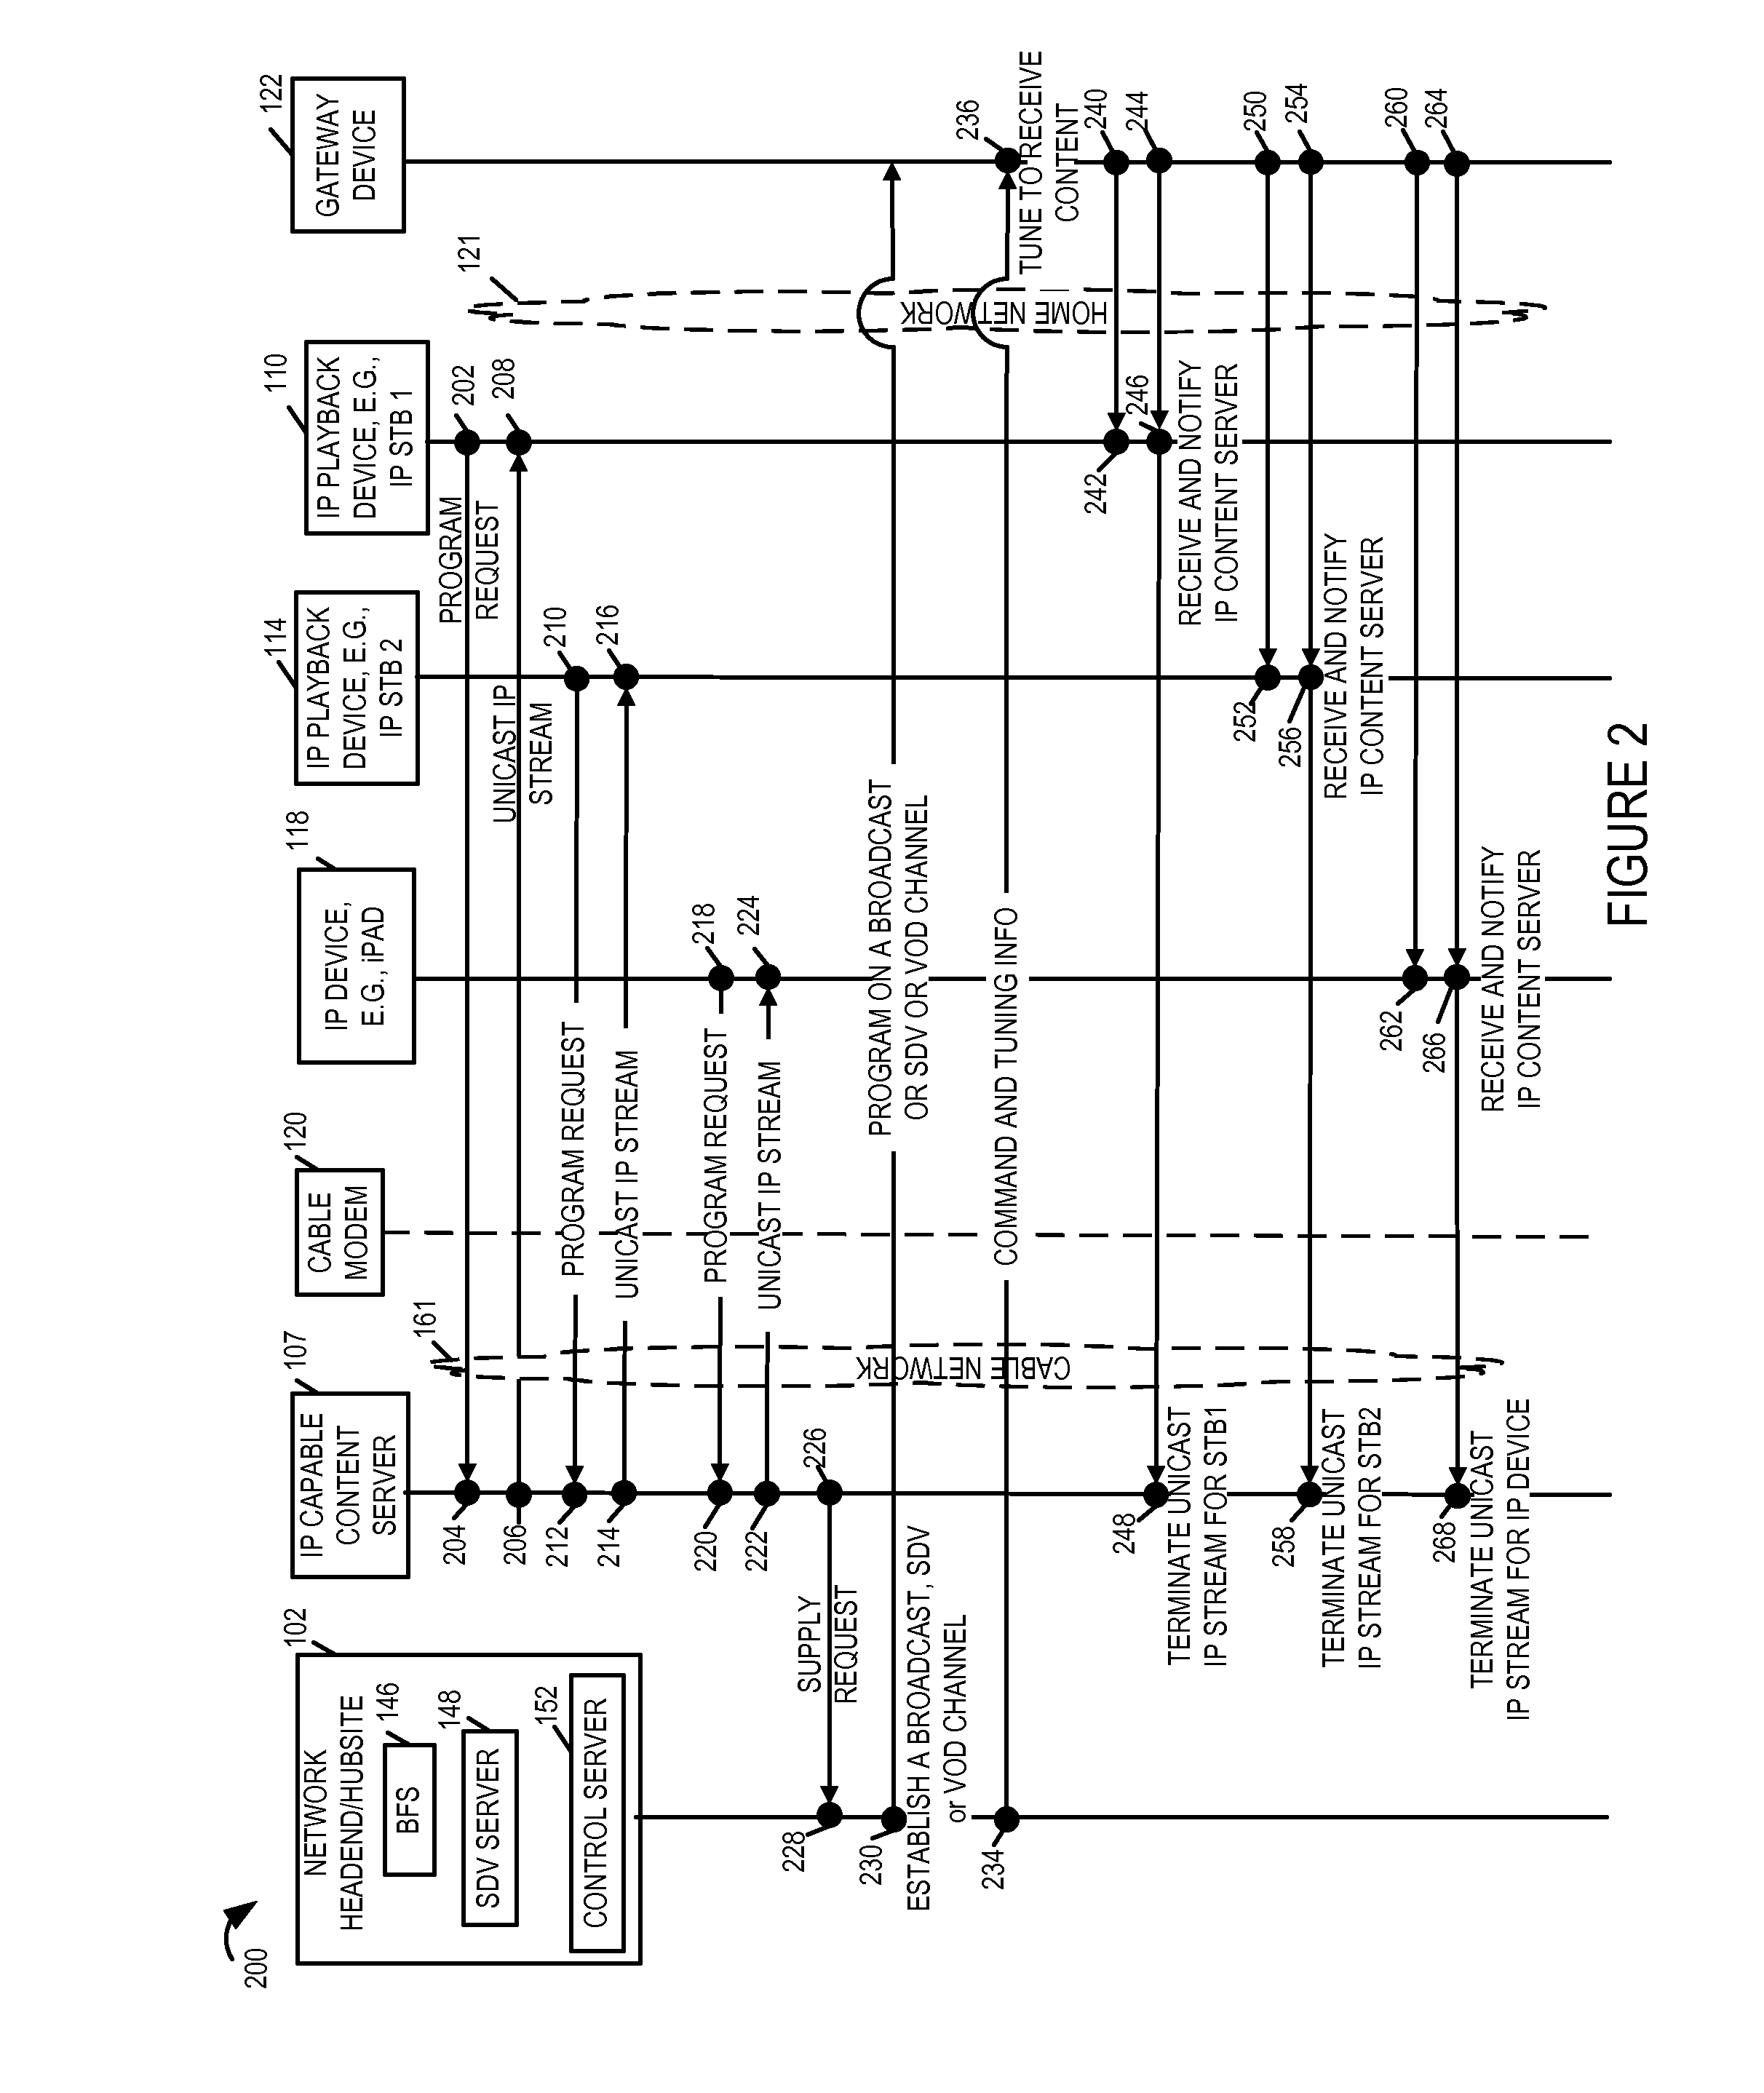 Methods and apparatus for dynamic management and bandwidth allocation for content delivery